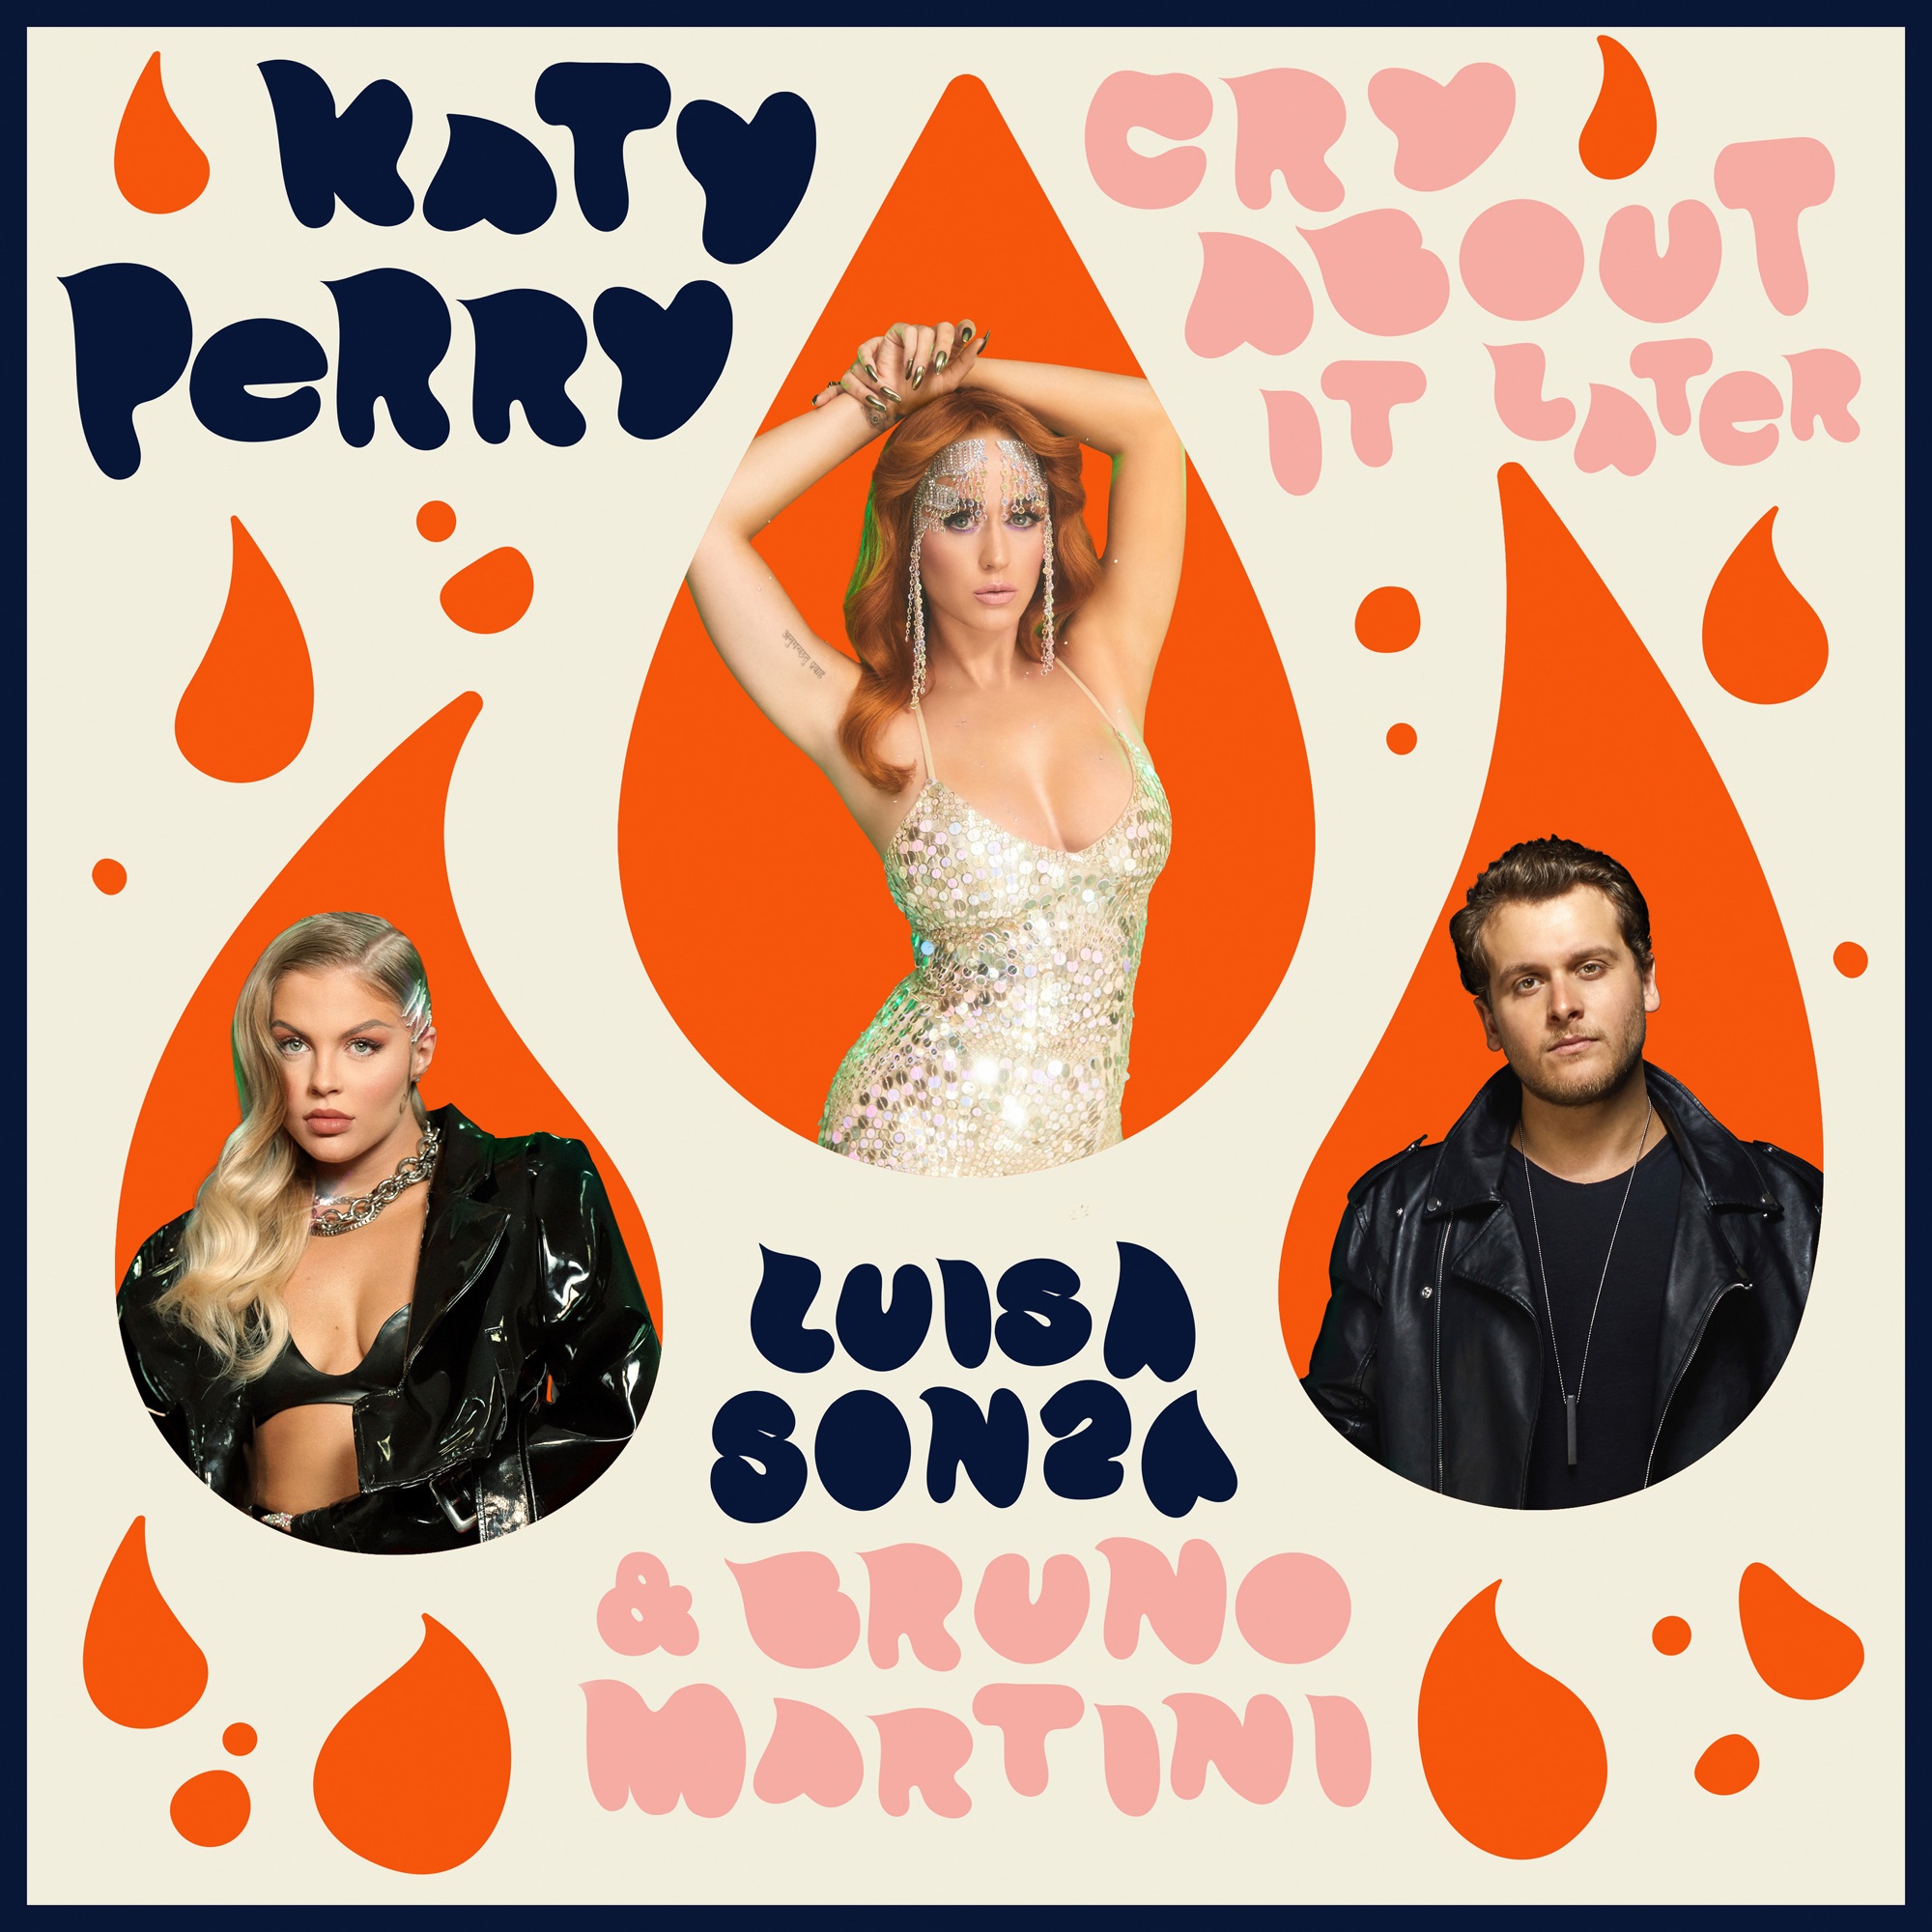 Katy Perry, Luísa Sonza & Bruno Martini - Cry About It Later - Single